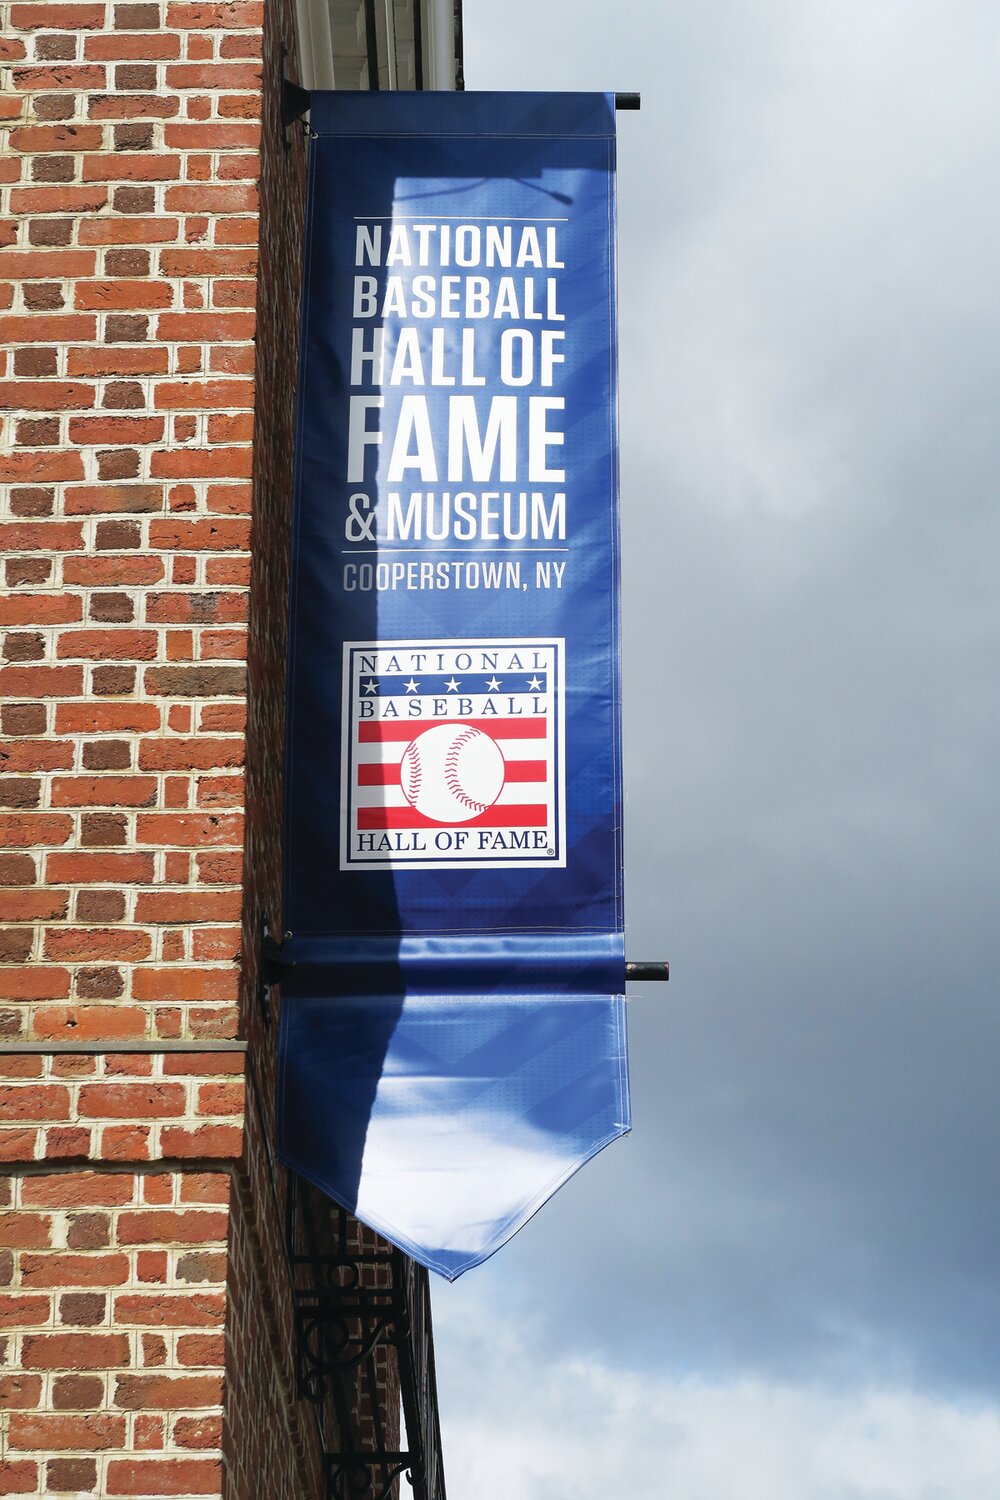 The National Baseball Hall of Fame in Cooperstown NY has lots to offer baseball fans.